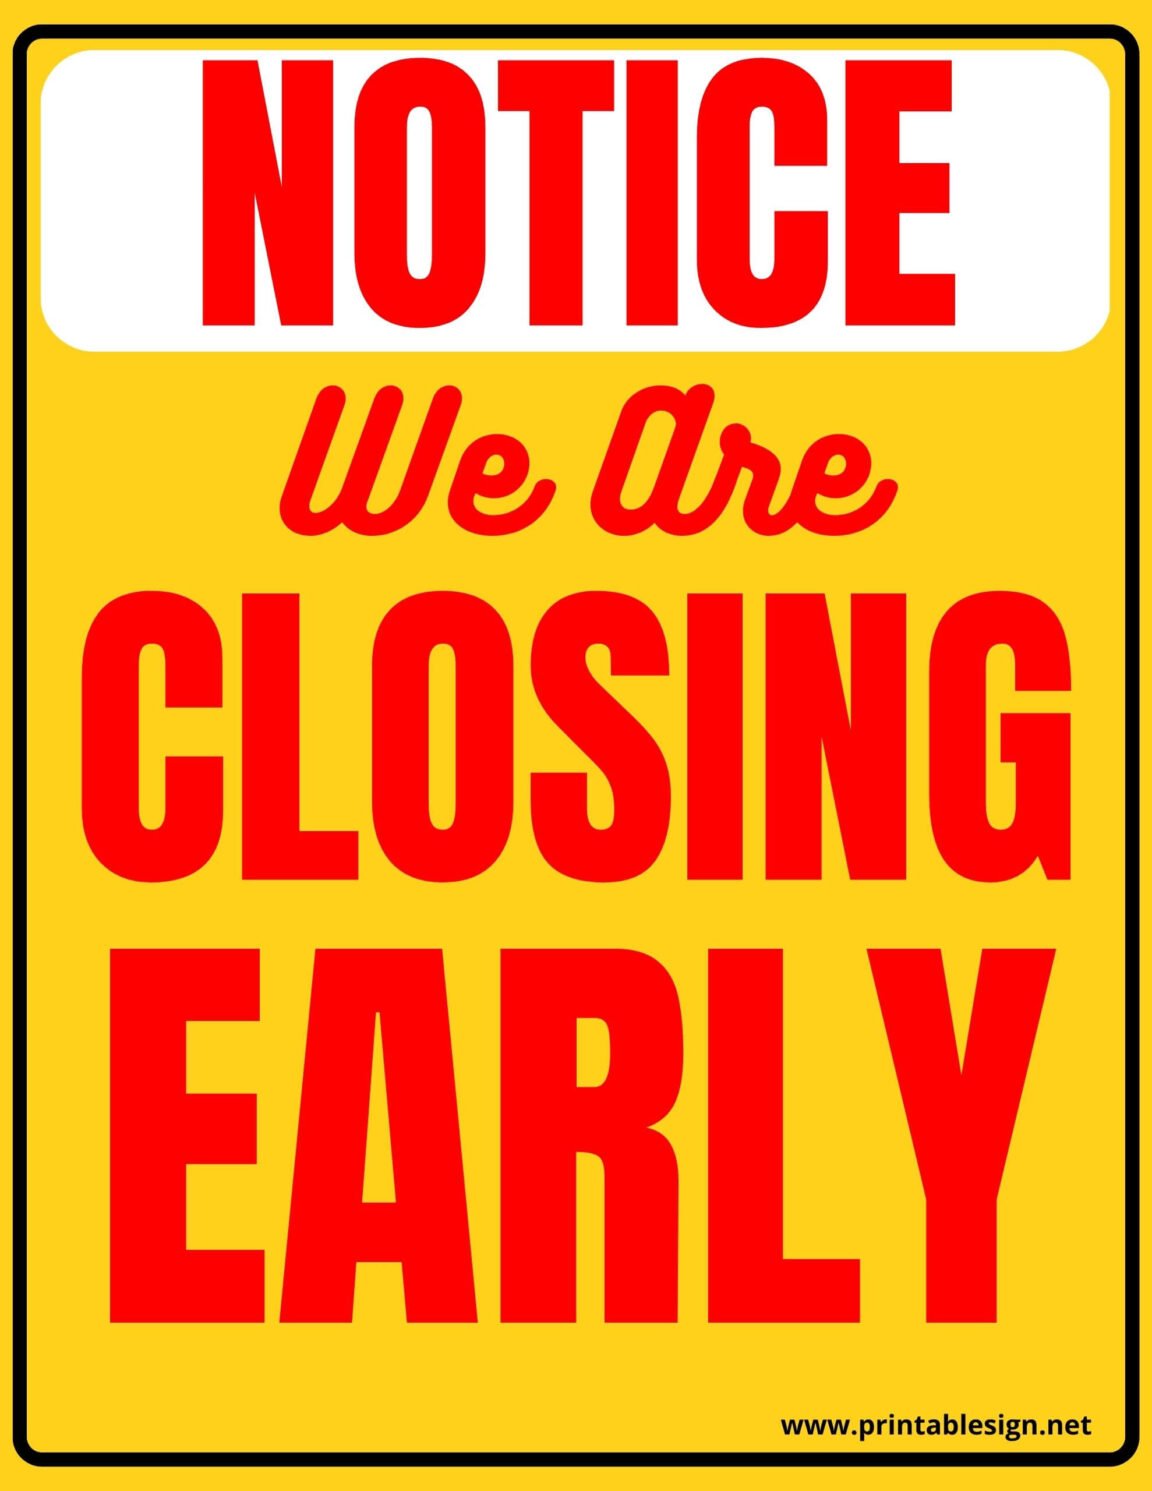 Closing Early Sign Template Word